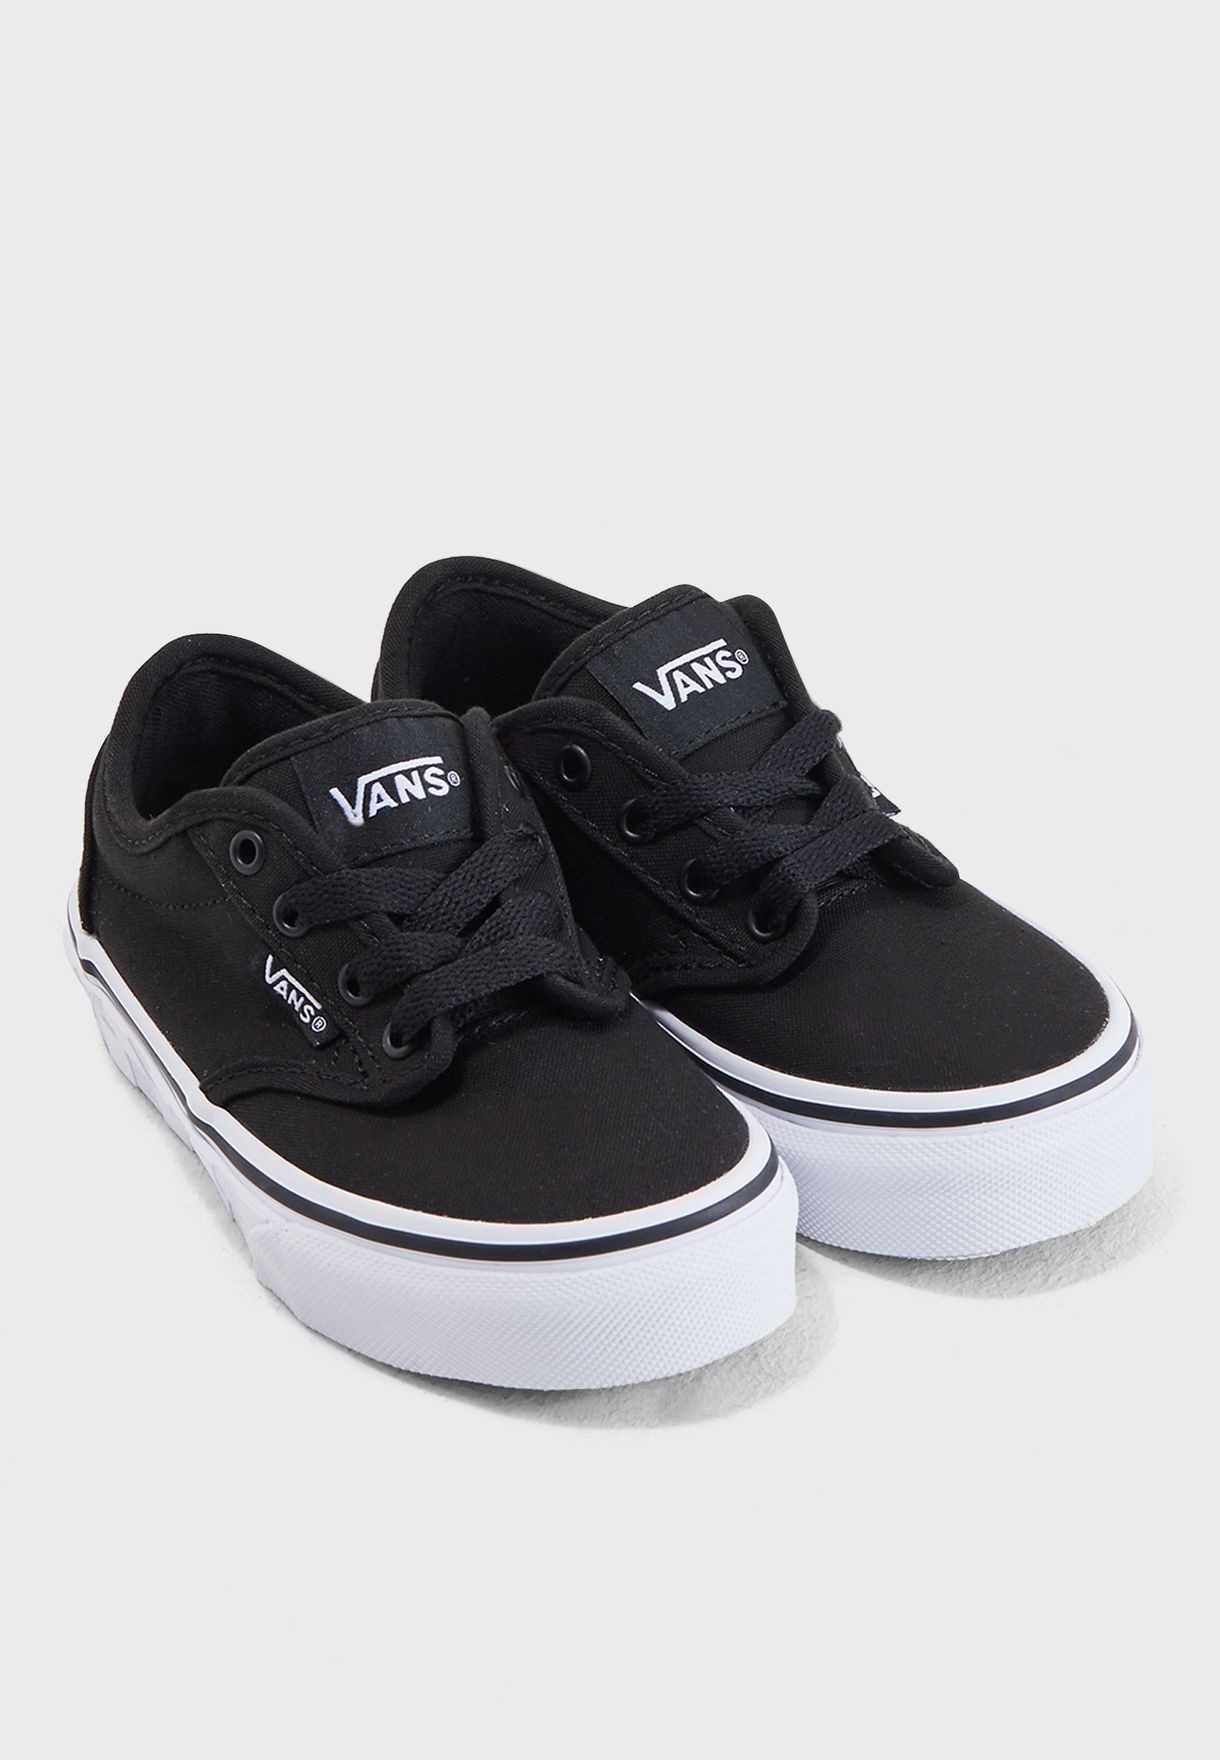 vans youth atwood - psidiagnosticins 